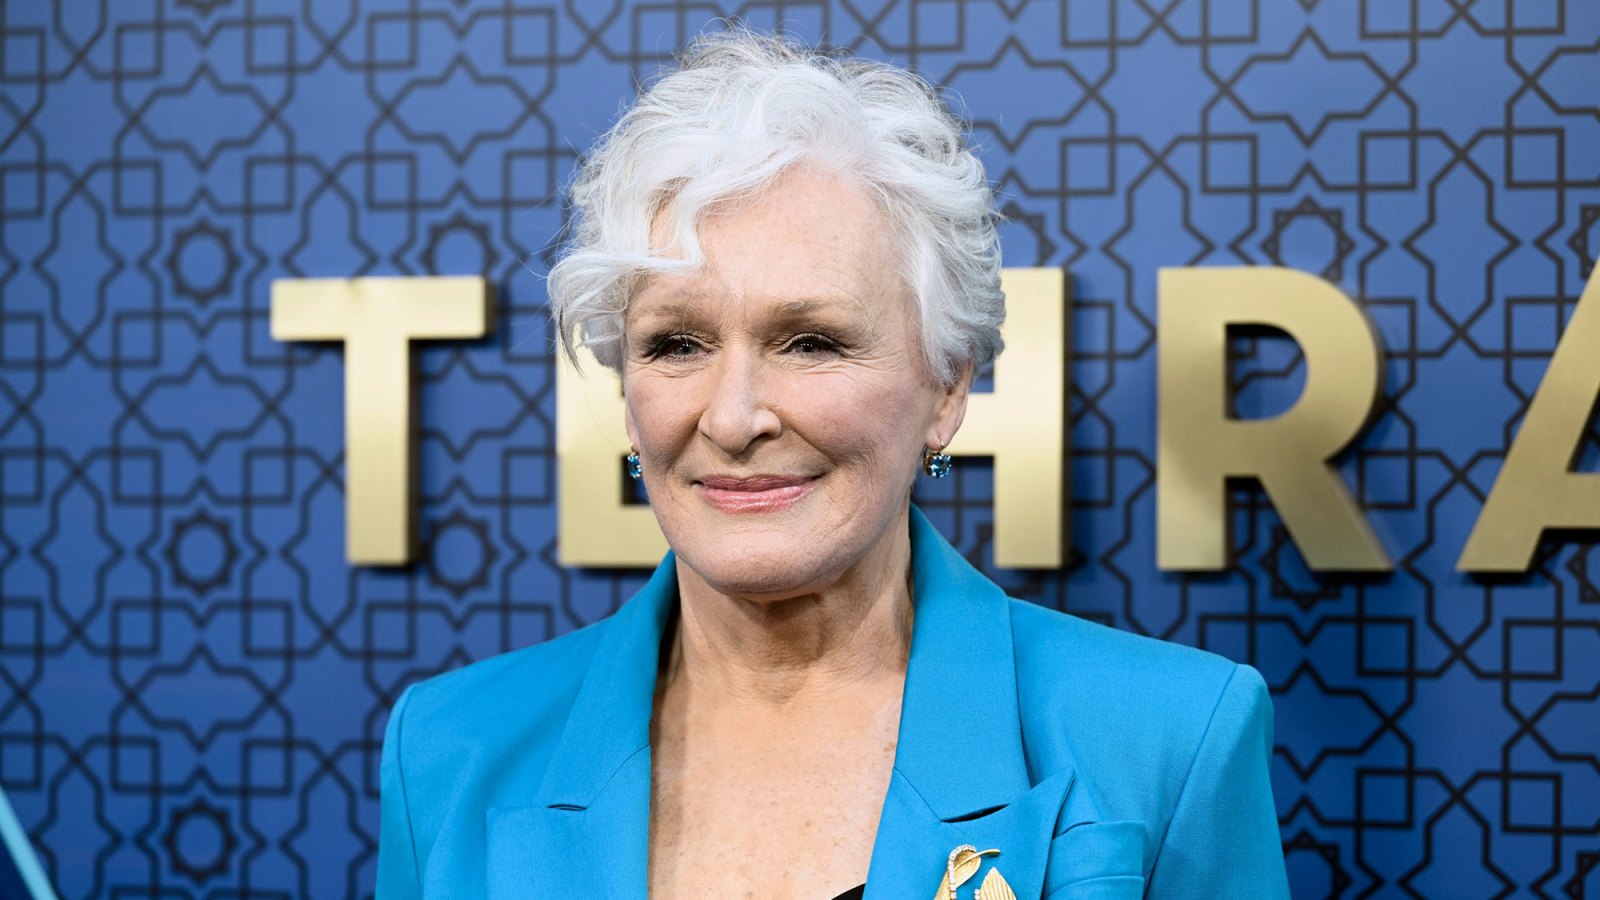 Glenn Close Is Not Attending the Oscars After Testing Positive for COVID-19, Canceling 'Air Force One' Reunion